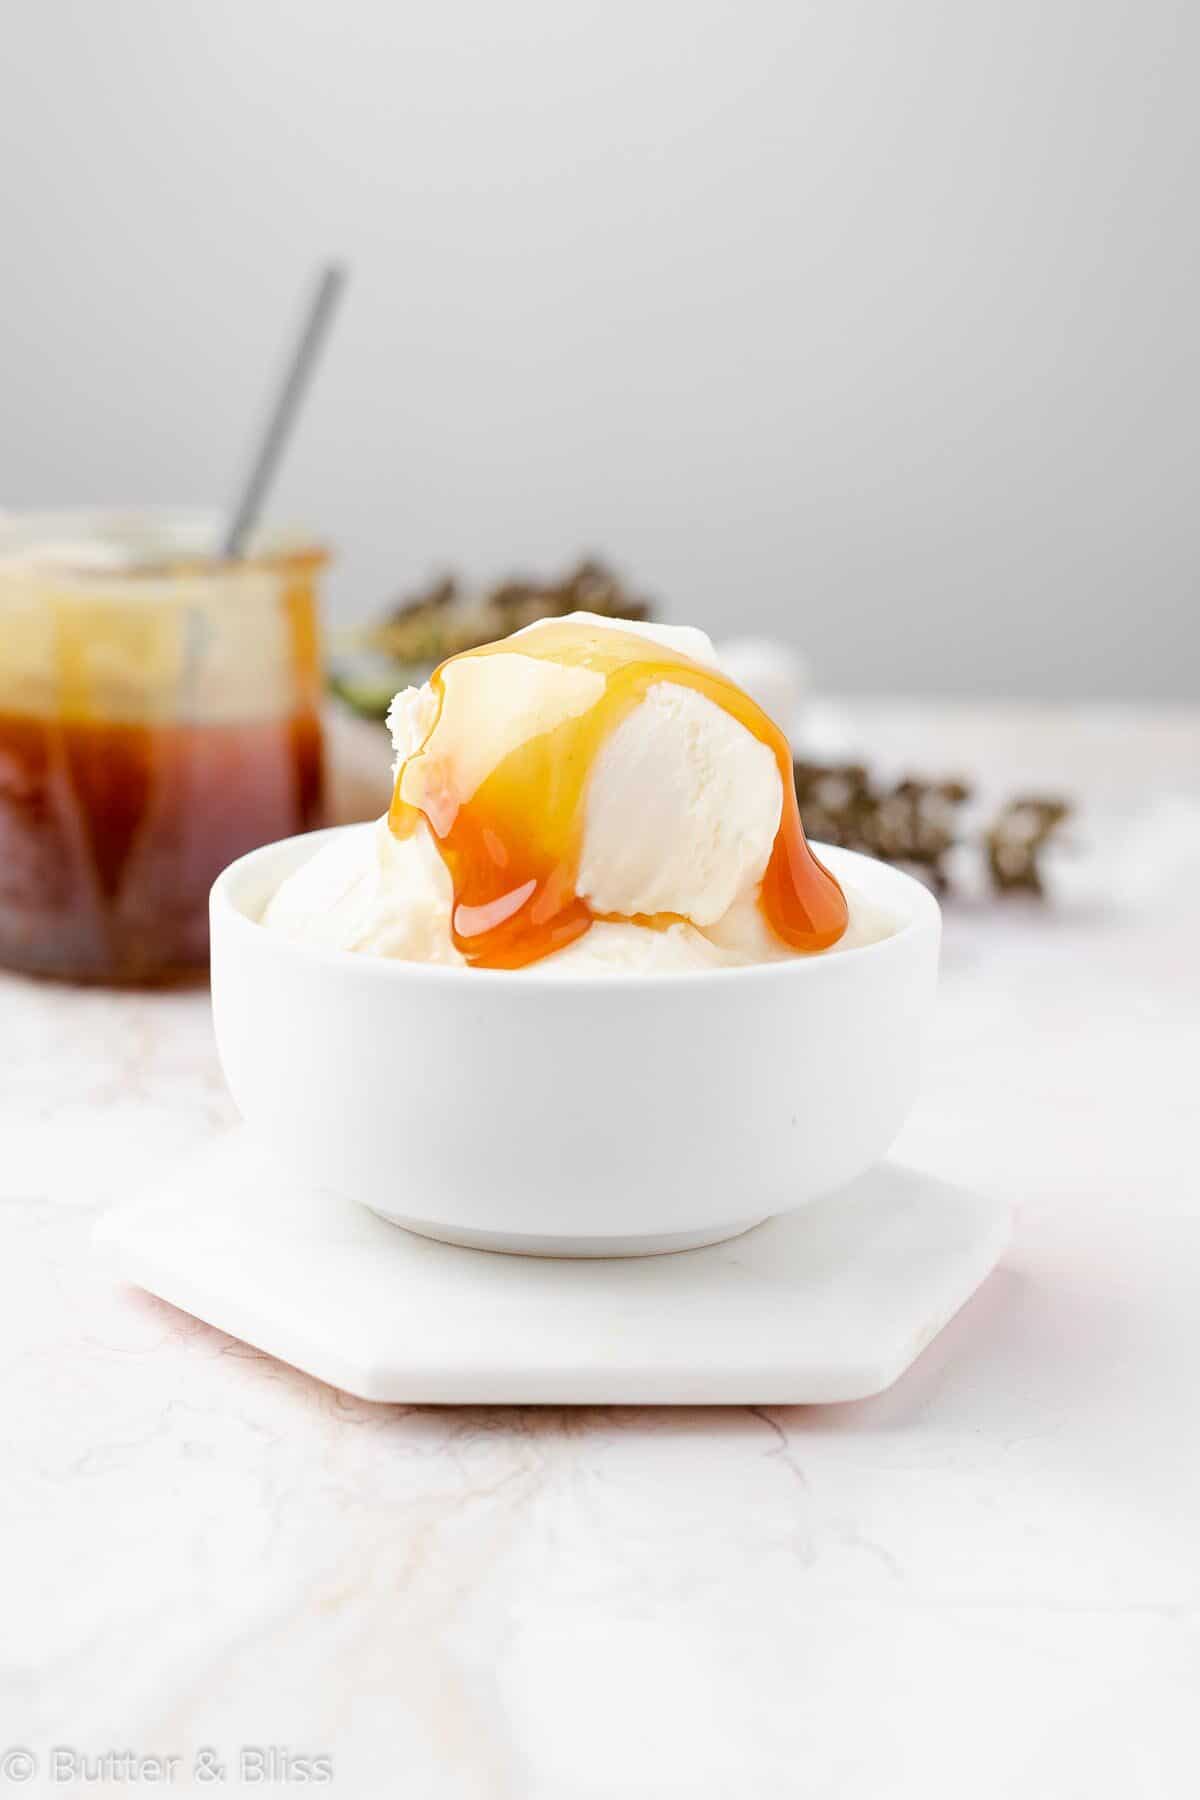 Maple syrup caramel sauce drizzled over ice cream